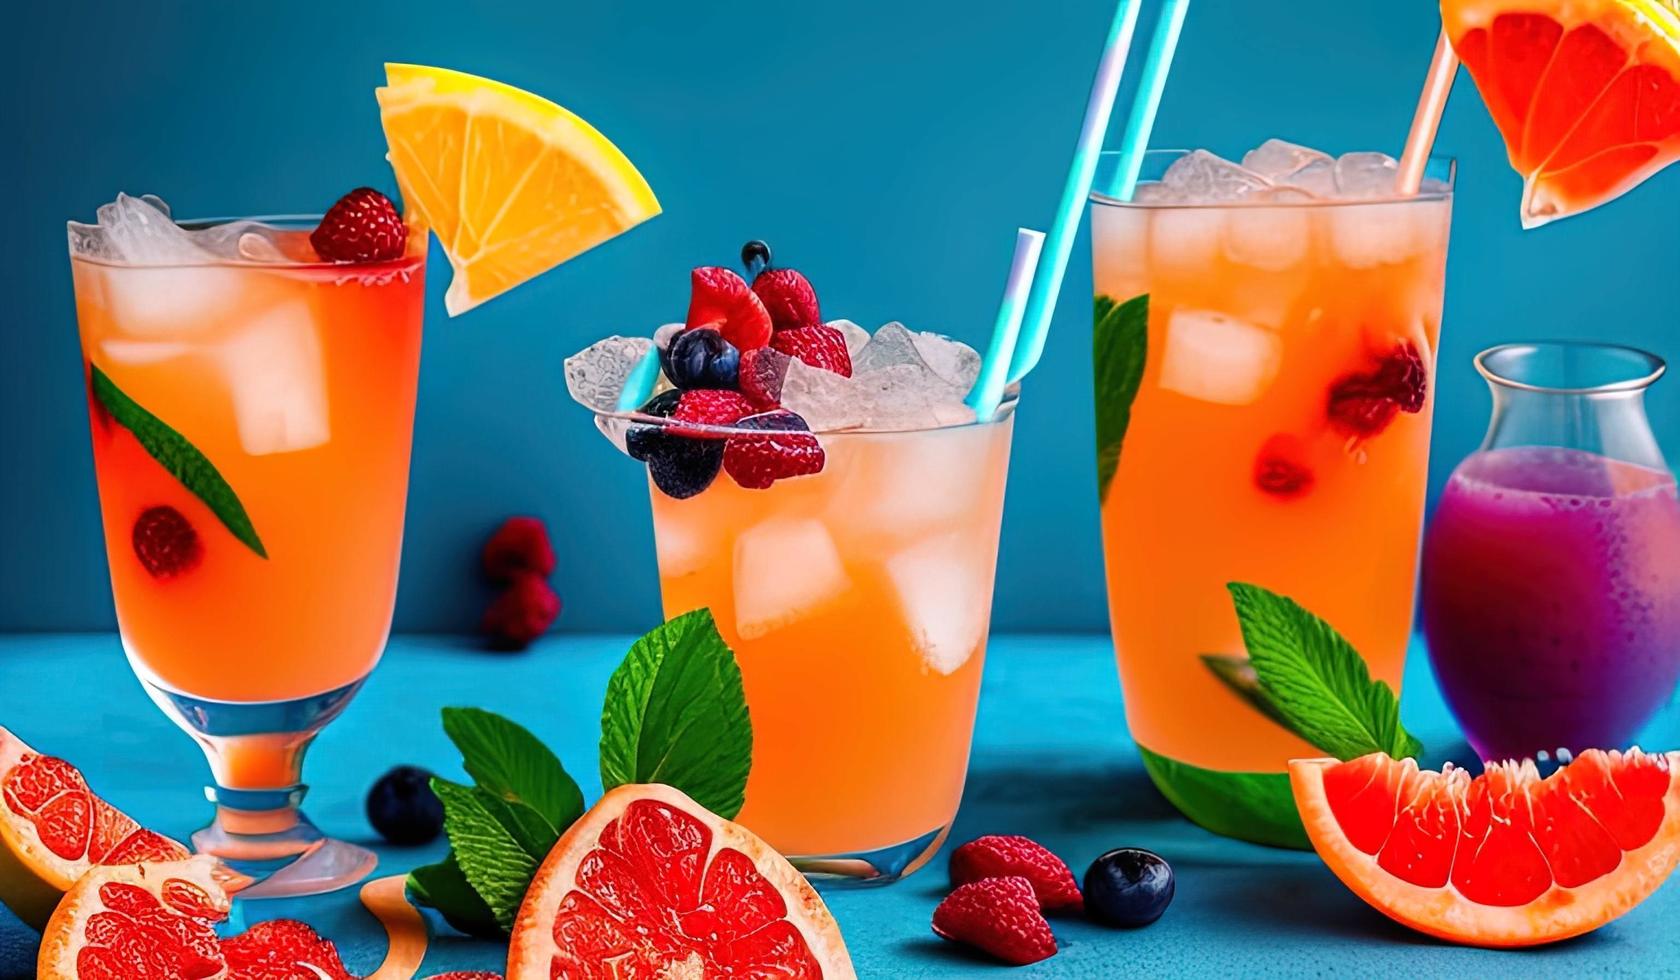 professional food photography closeup of Tropical fruit summer coctail with red grapefruit, berries and ice on blue background photo